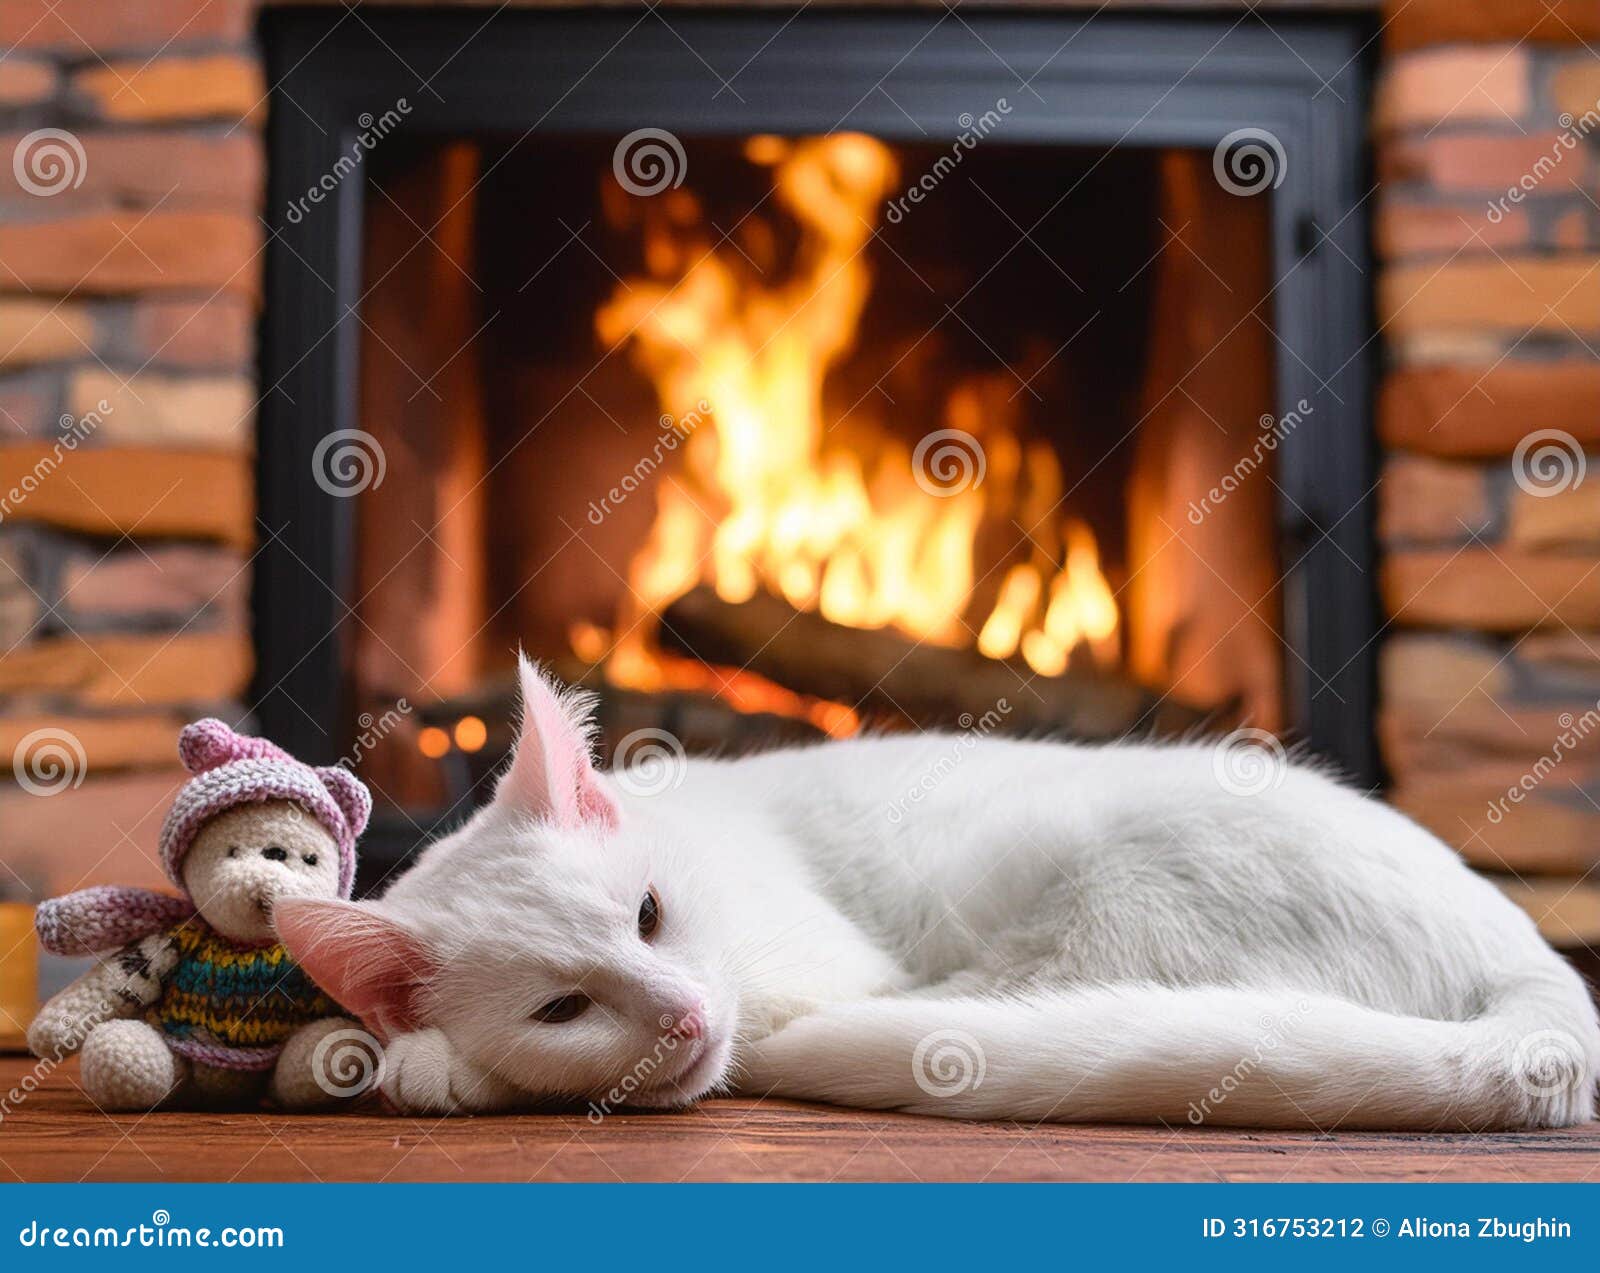 a white cat sleeping comfortably in front of the fireplace